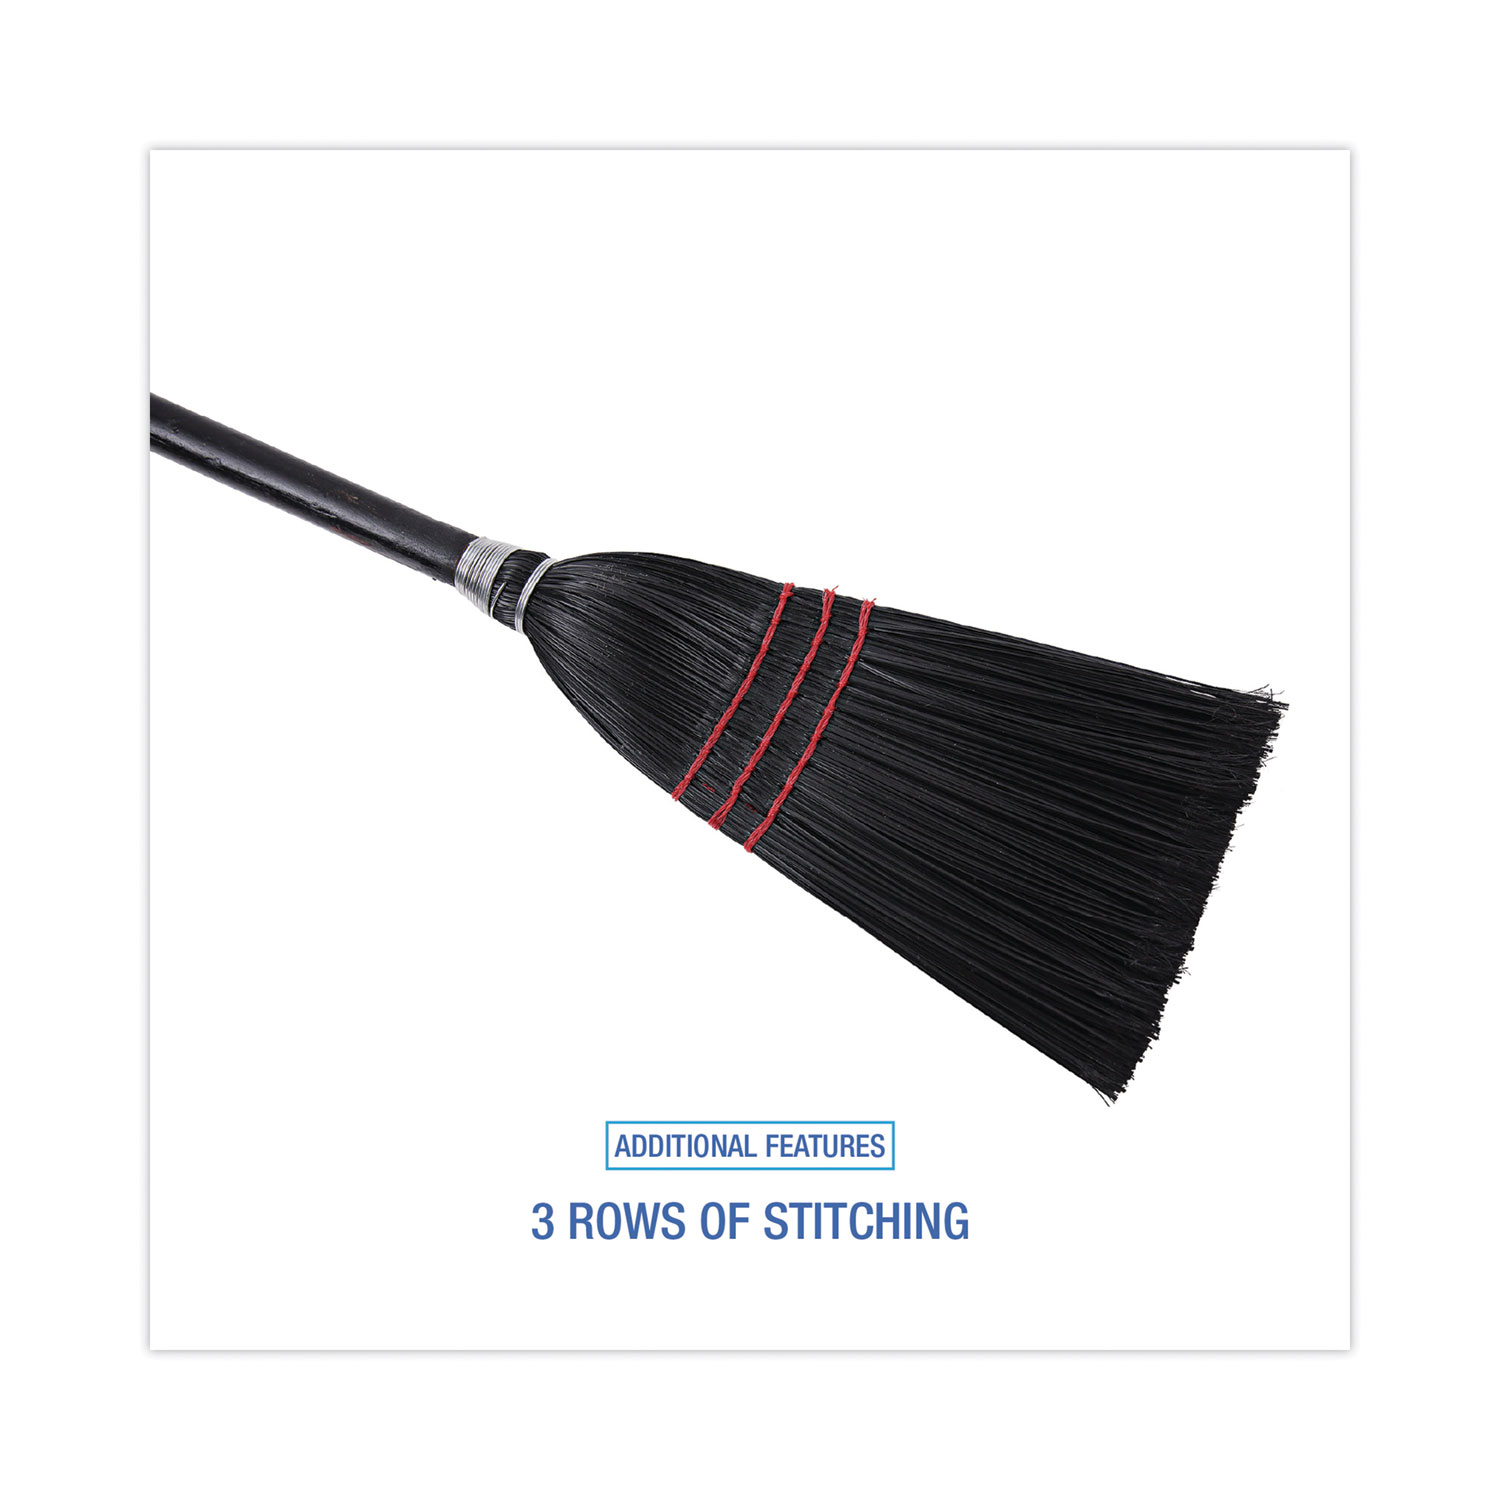 Rubbermaid Commercial Lobby Pro Poly Bristle Broom, Black